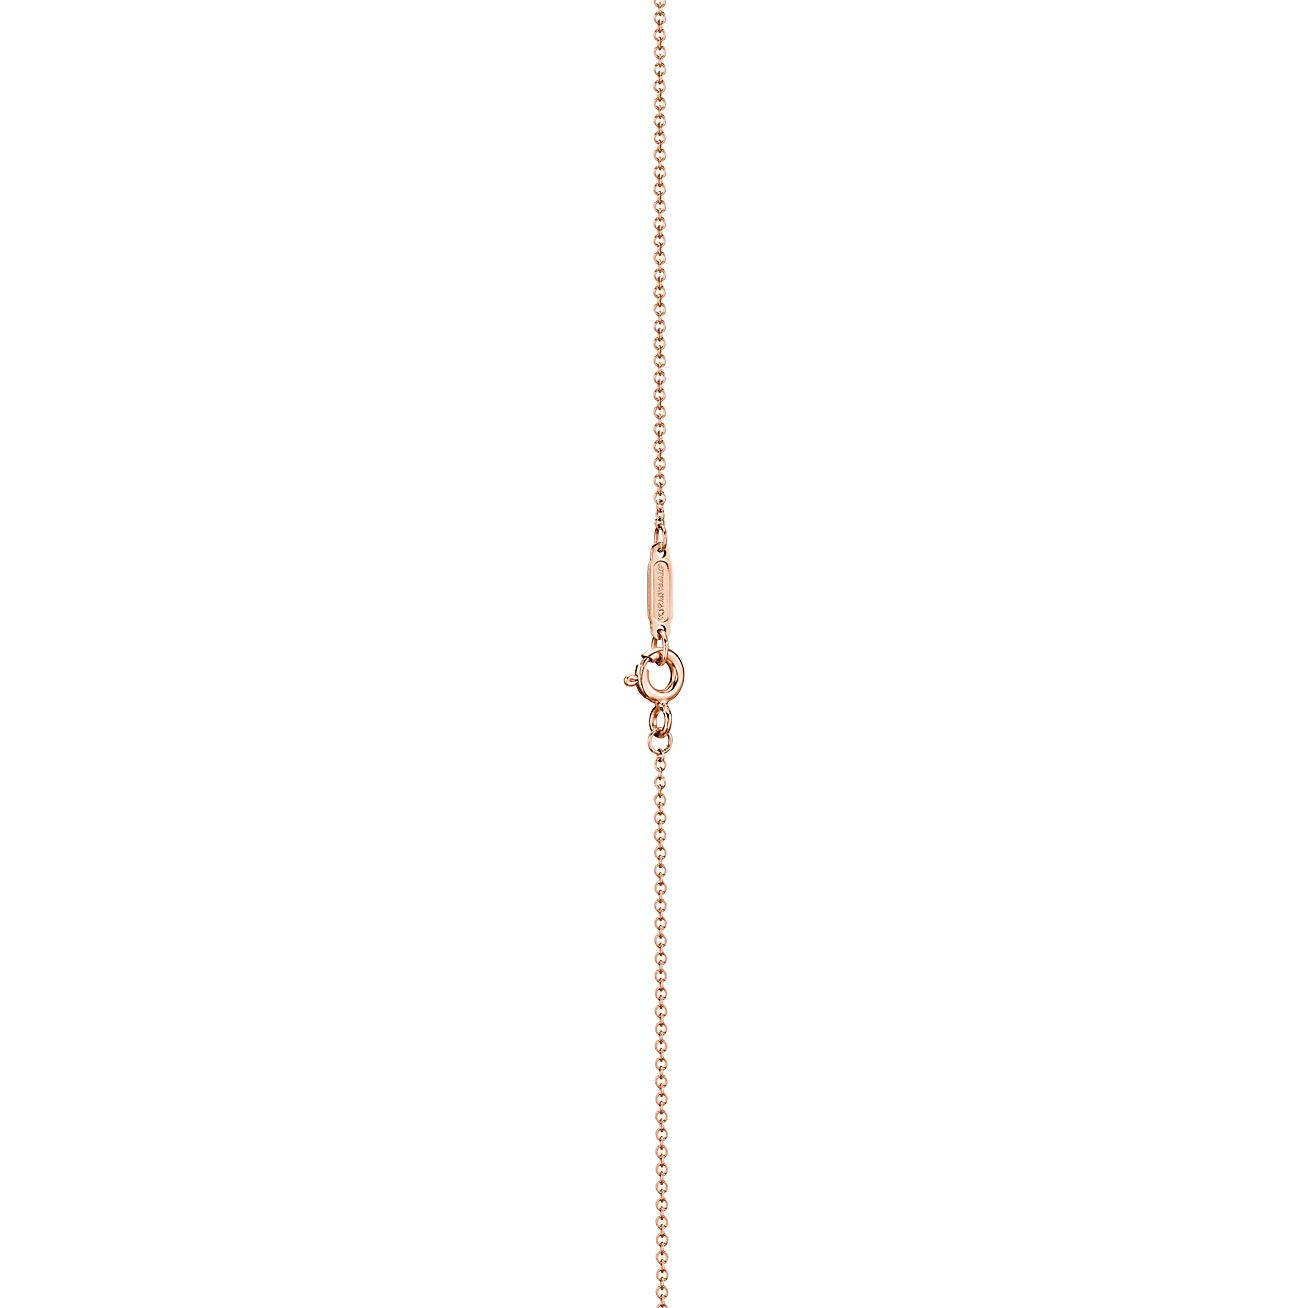 TIFFANY T SMILE PENDANT IN ROSE GOLD WITH DIAMONDS, LARGE